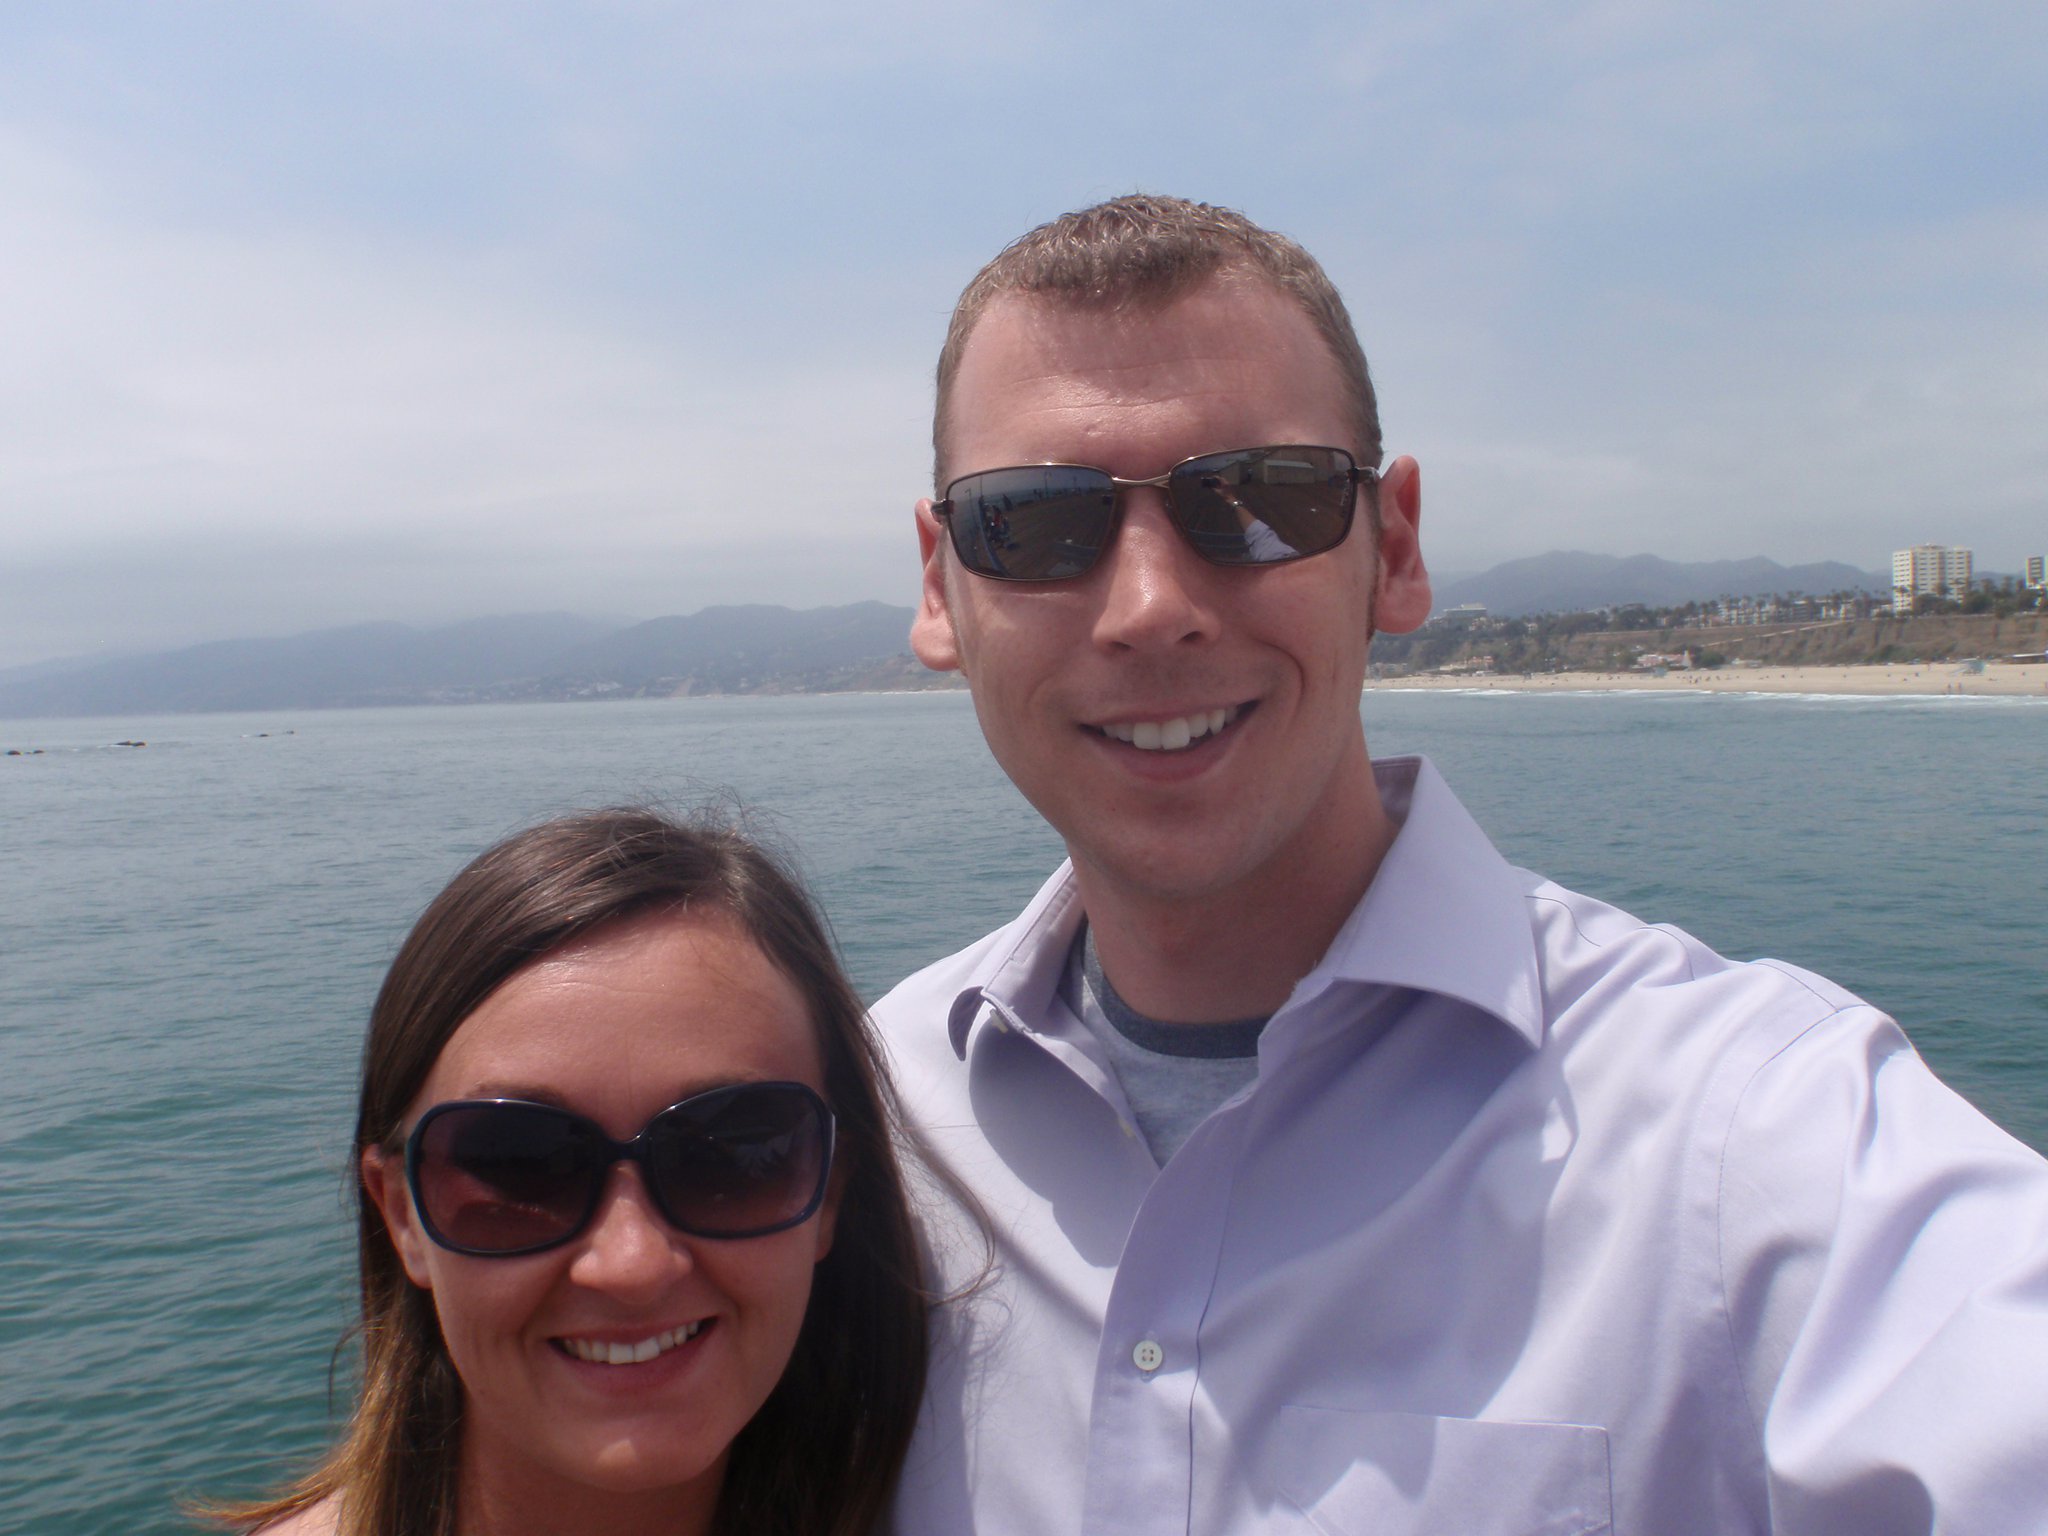 Brightergy Account Controller Tyler Staebell with his fiancee.